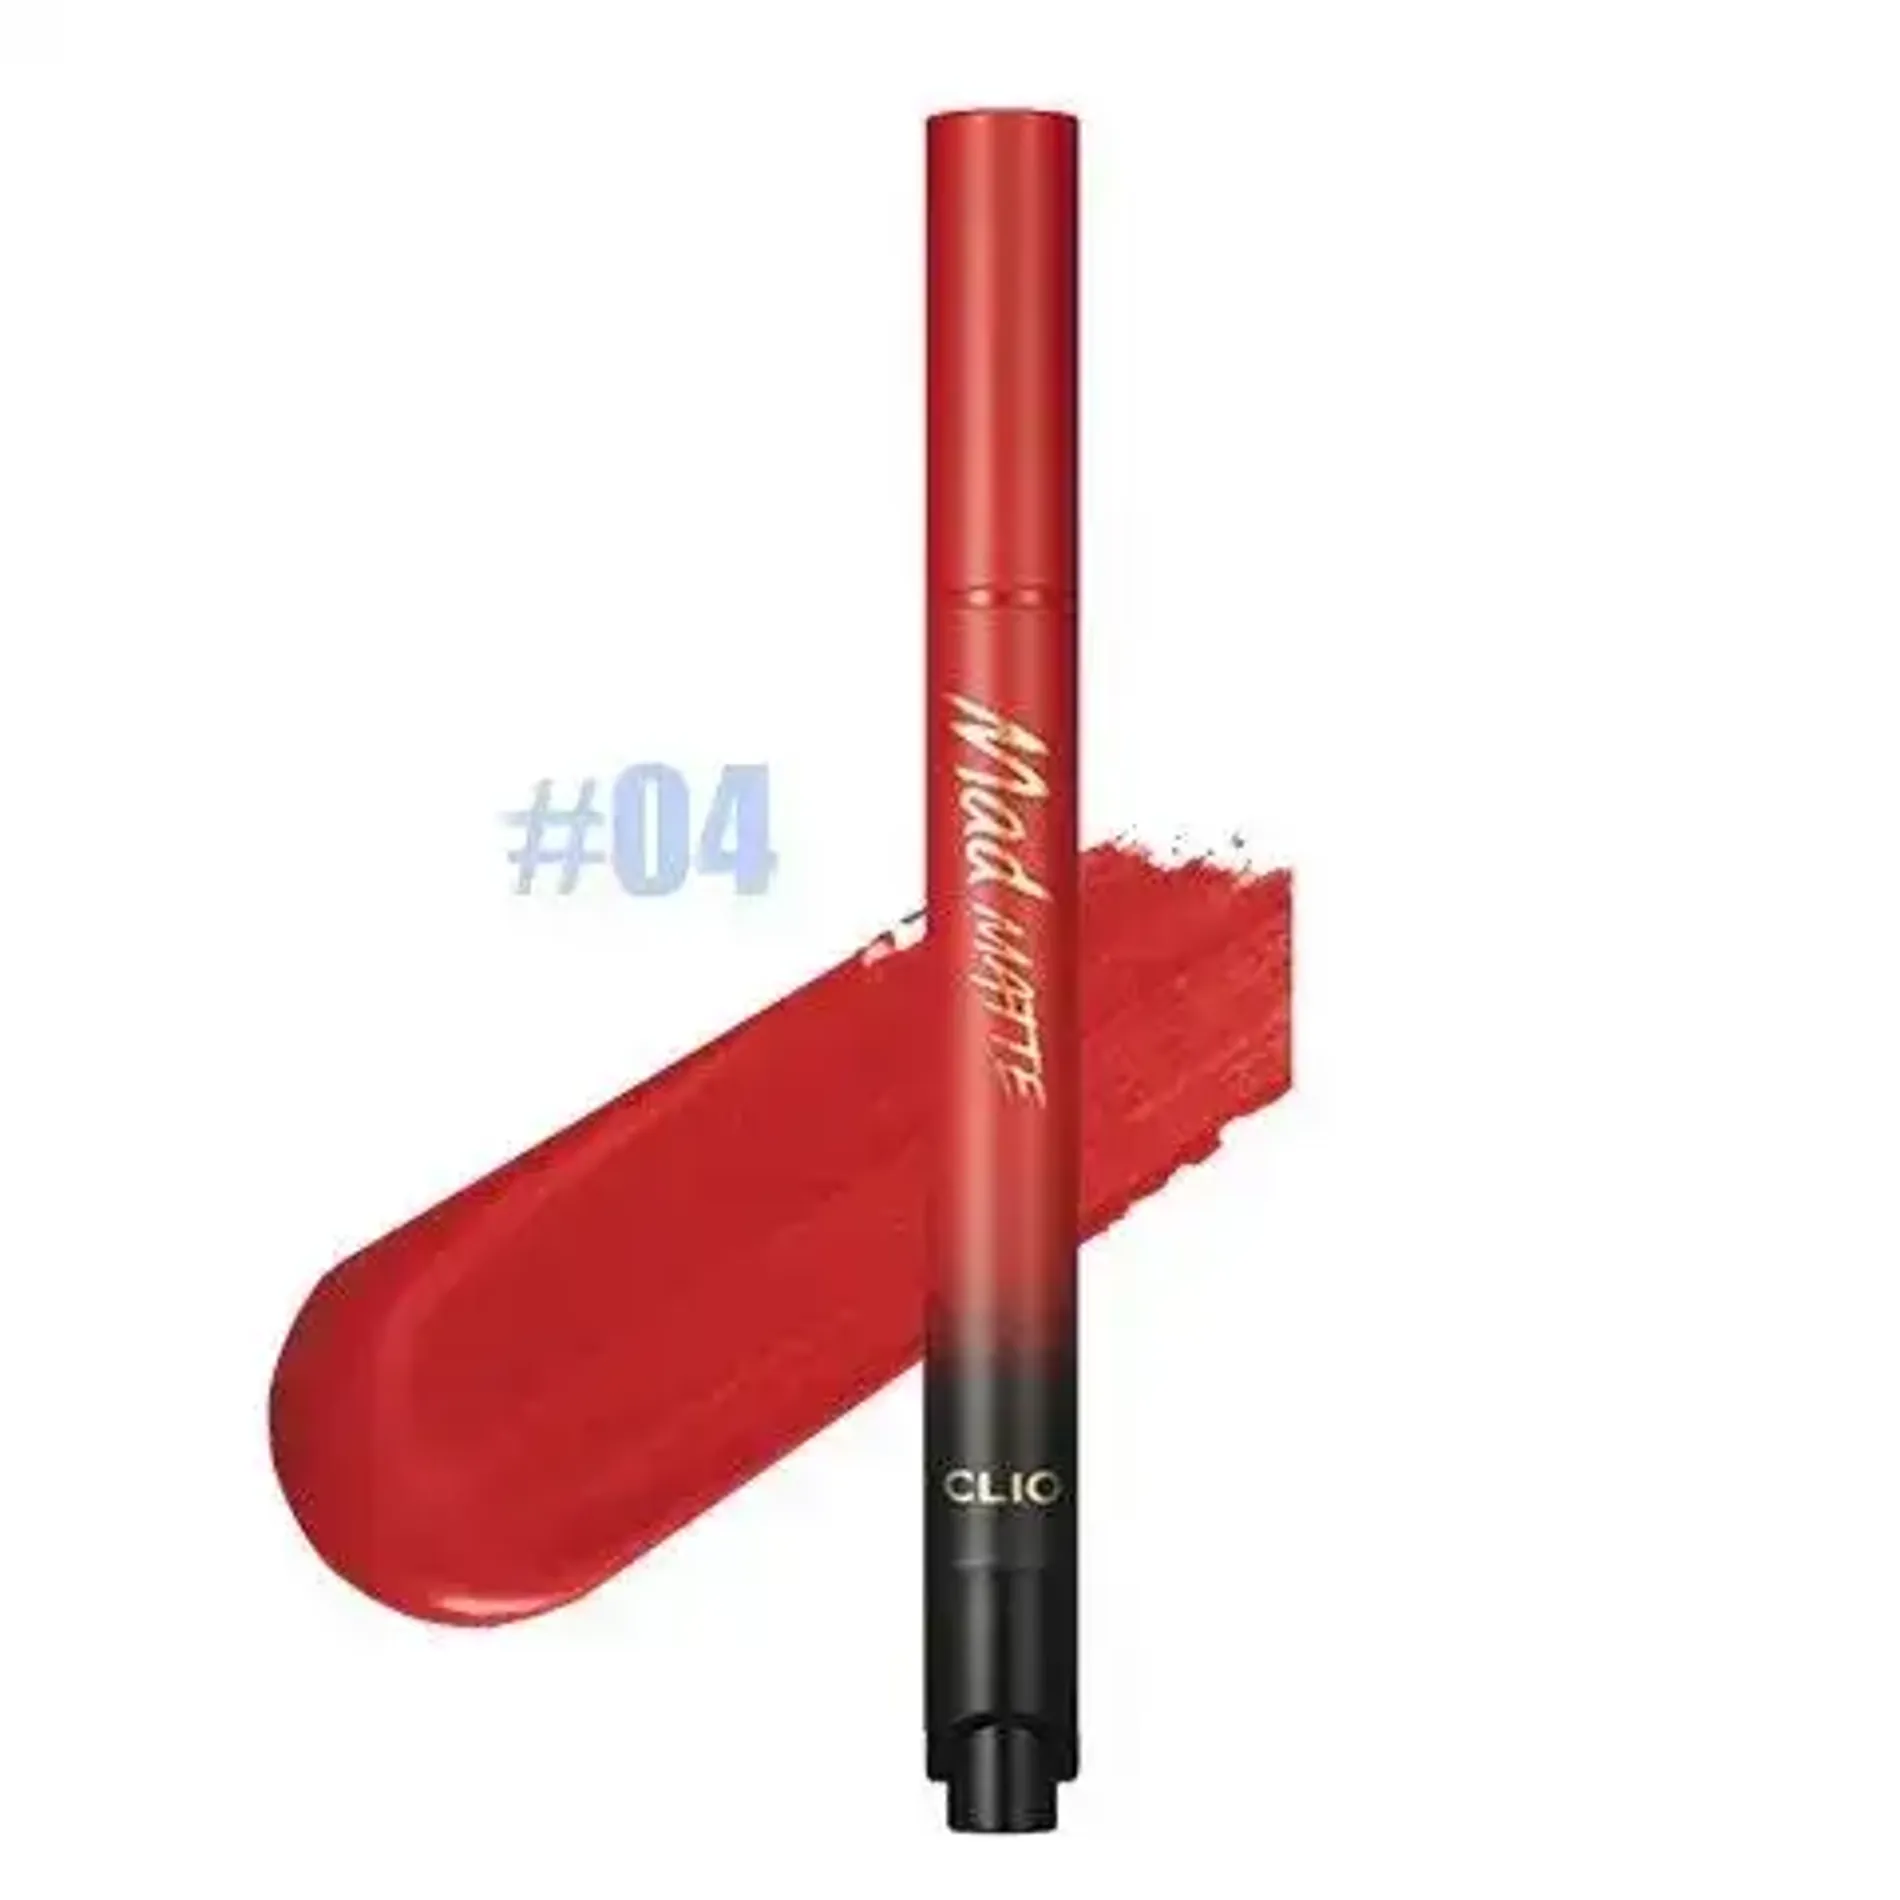 gift-son-nuoc-dang-bam-clio-mad-matte-stain-tint-2g-04-sundried-tomato-1